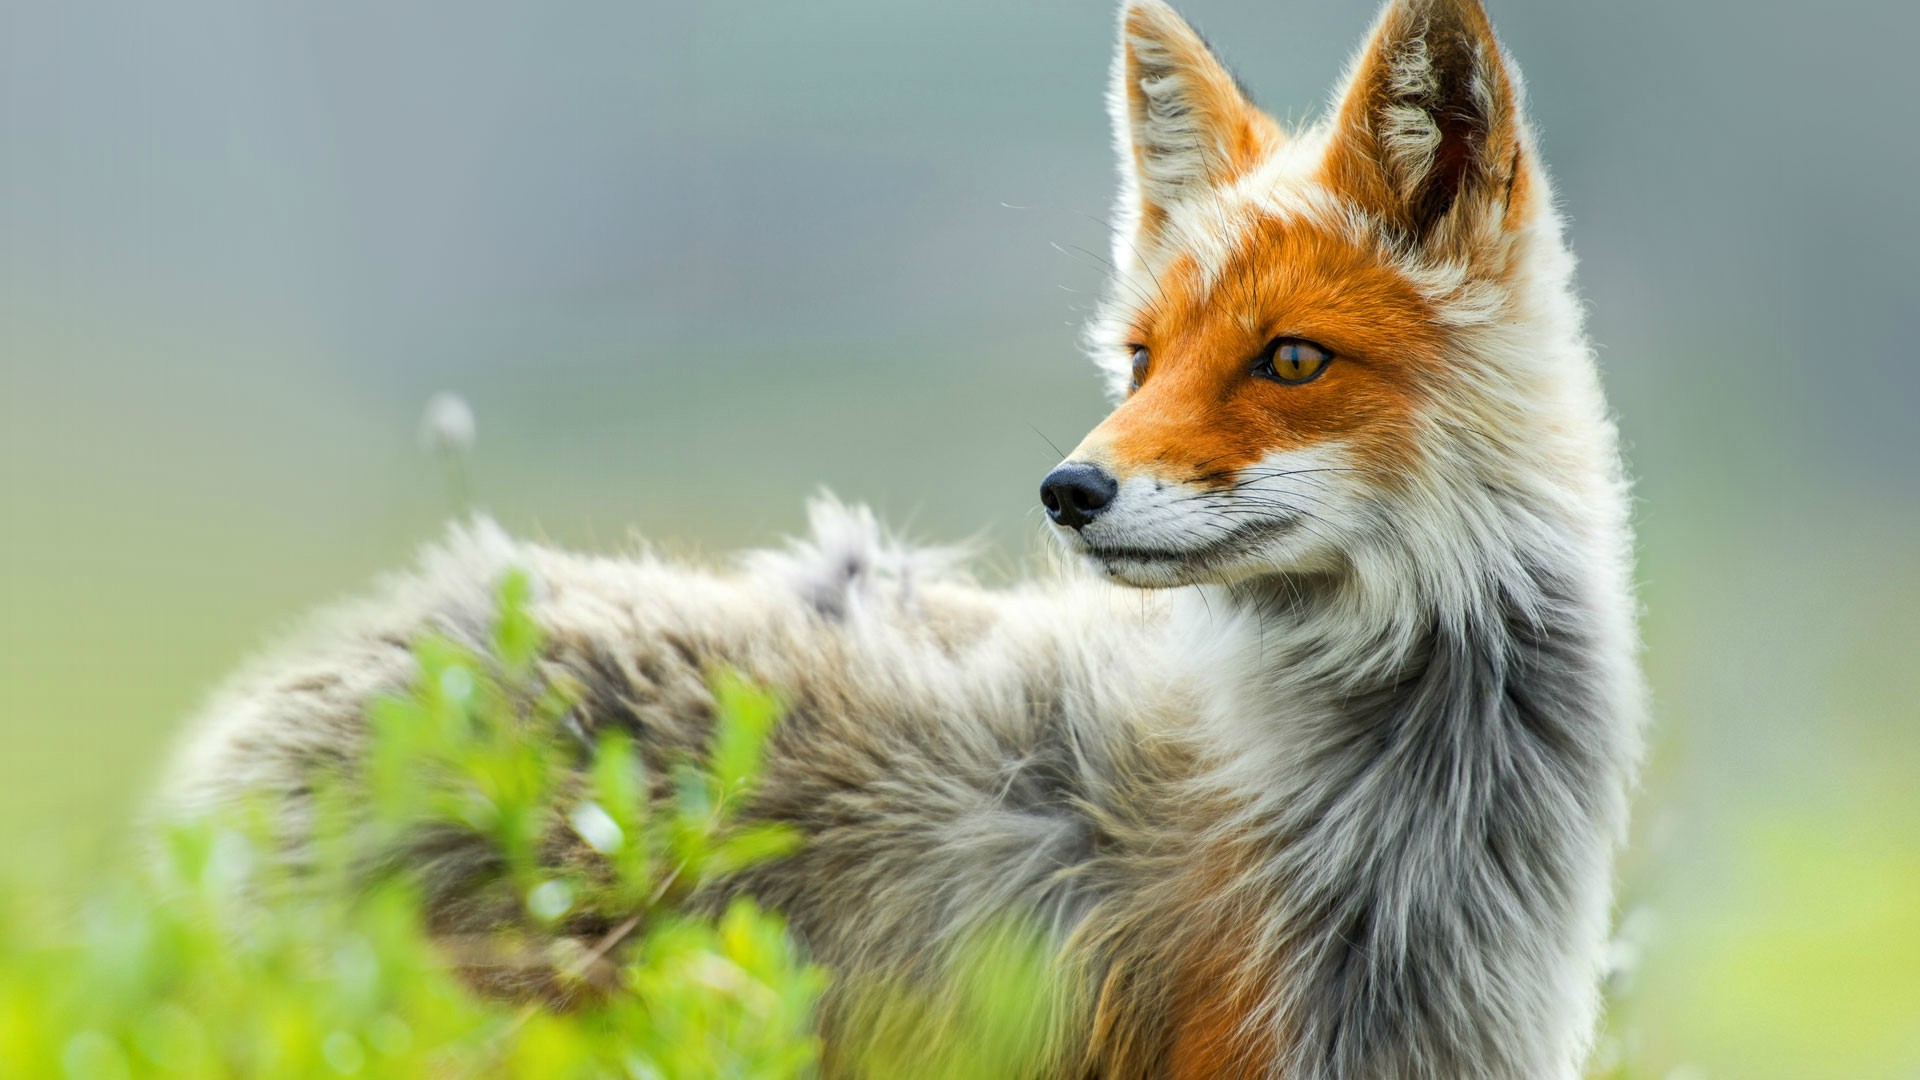 70 Red fox wallpapers HD  Download Free backgrounds